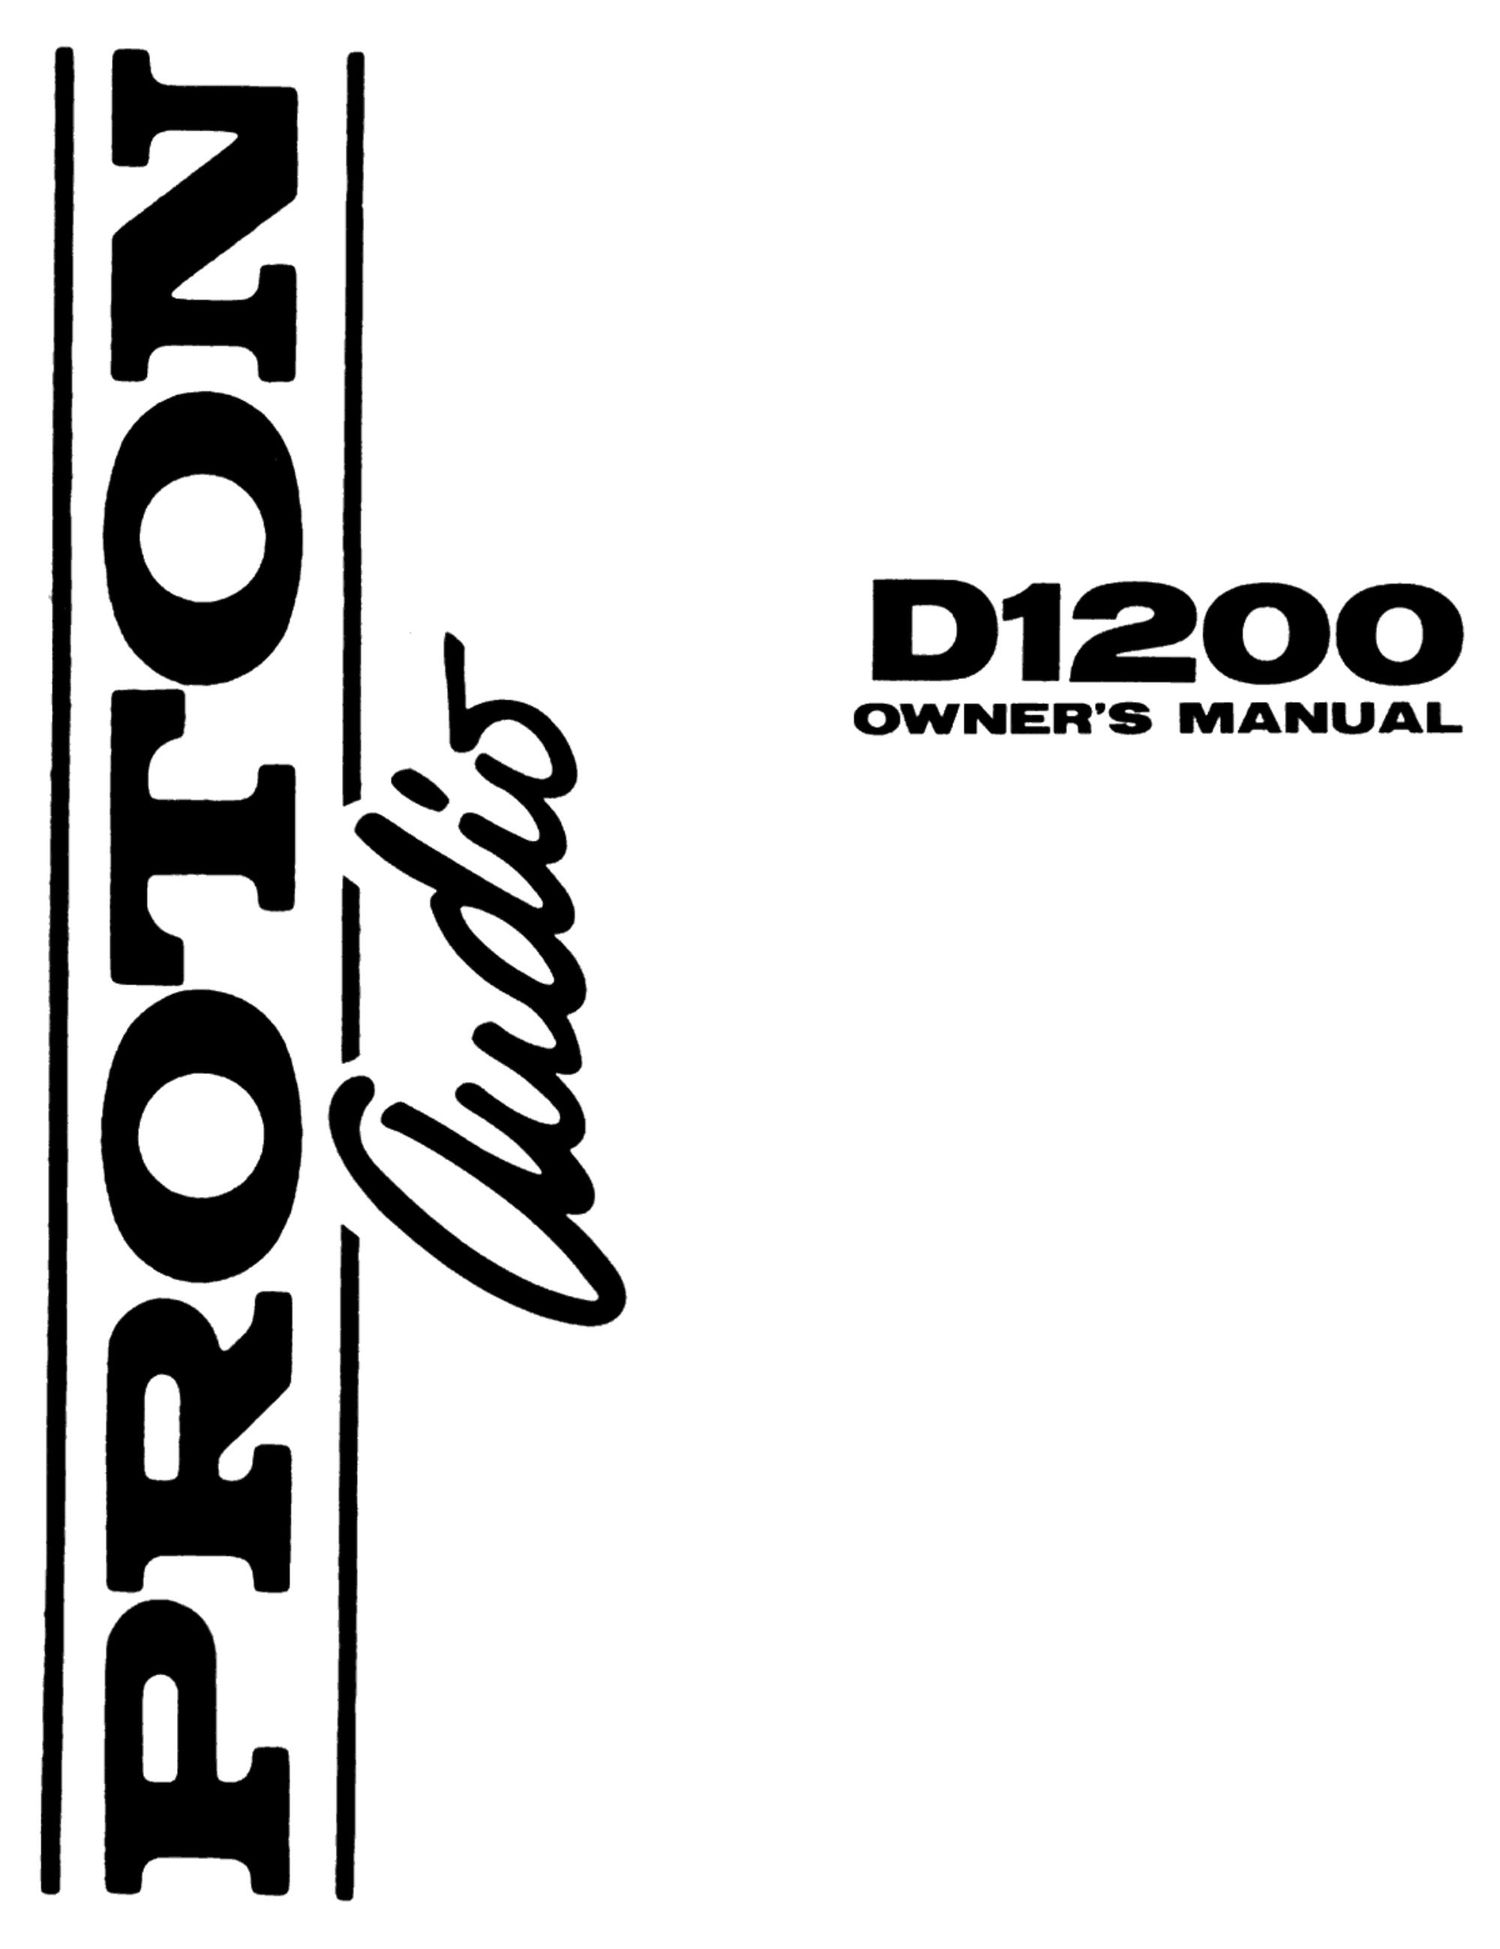 proton d 1200 owners manual